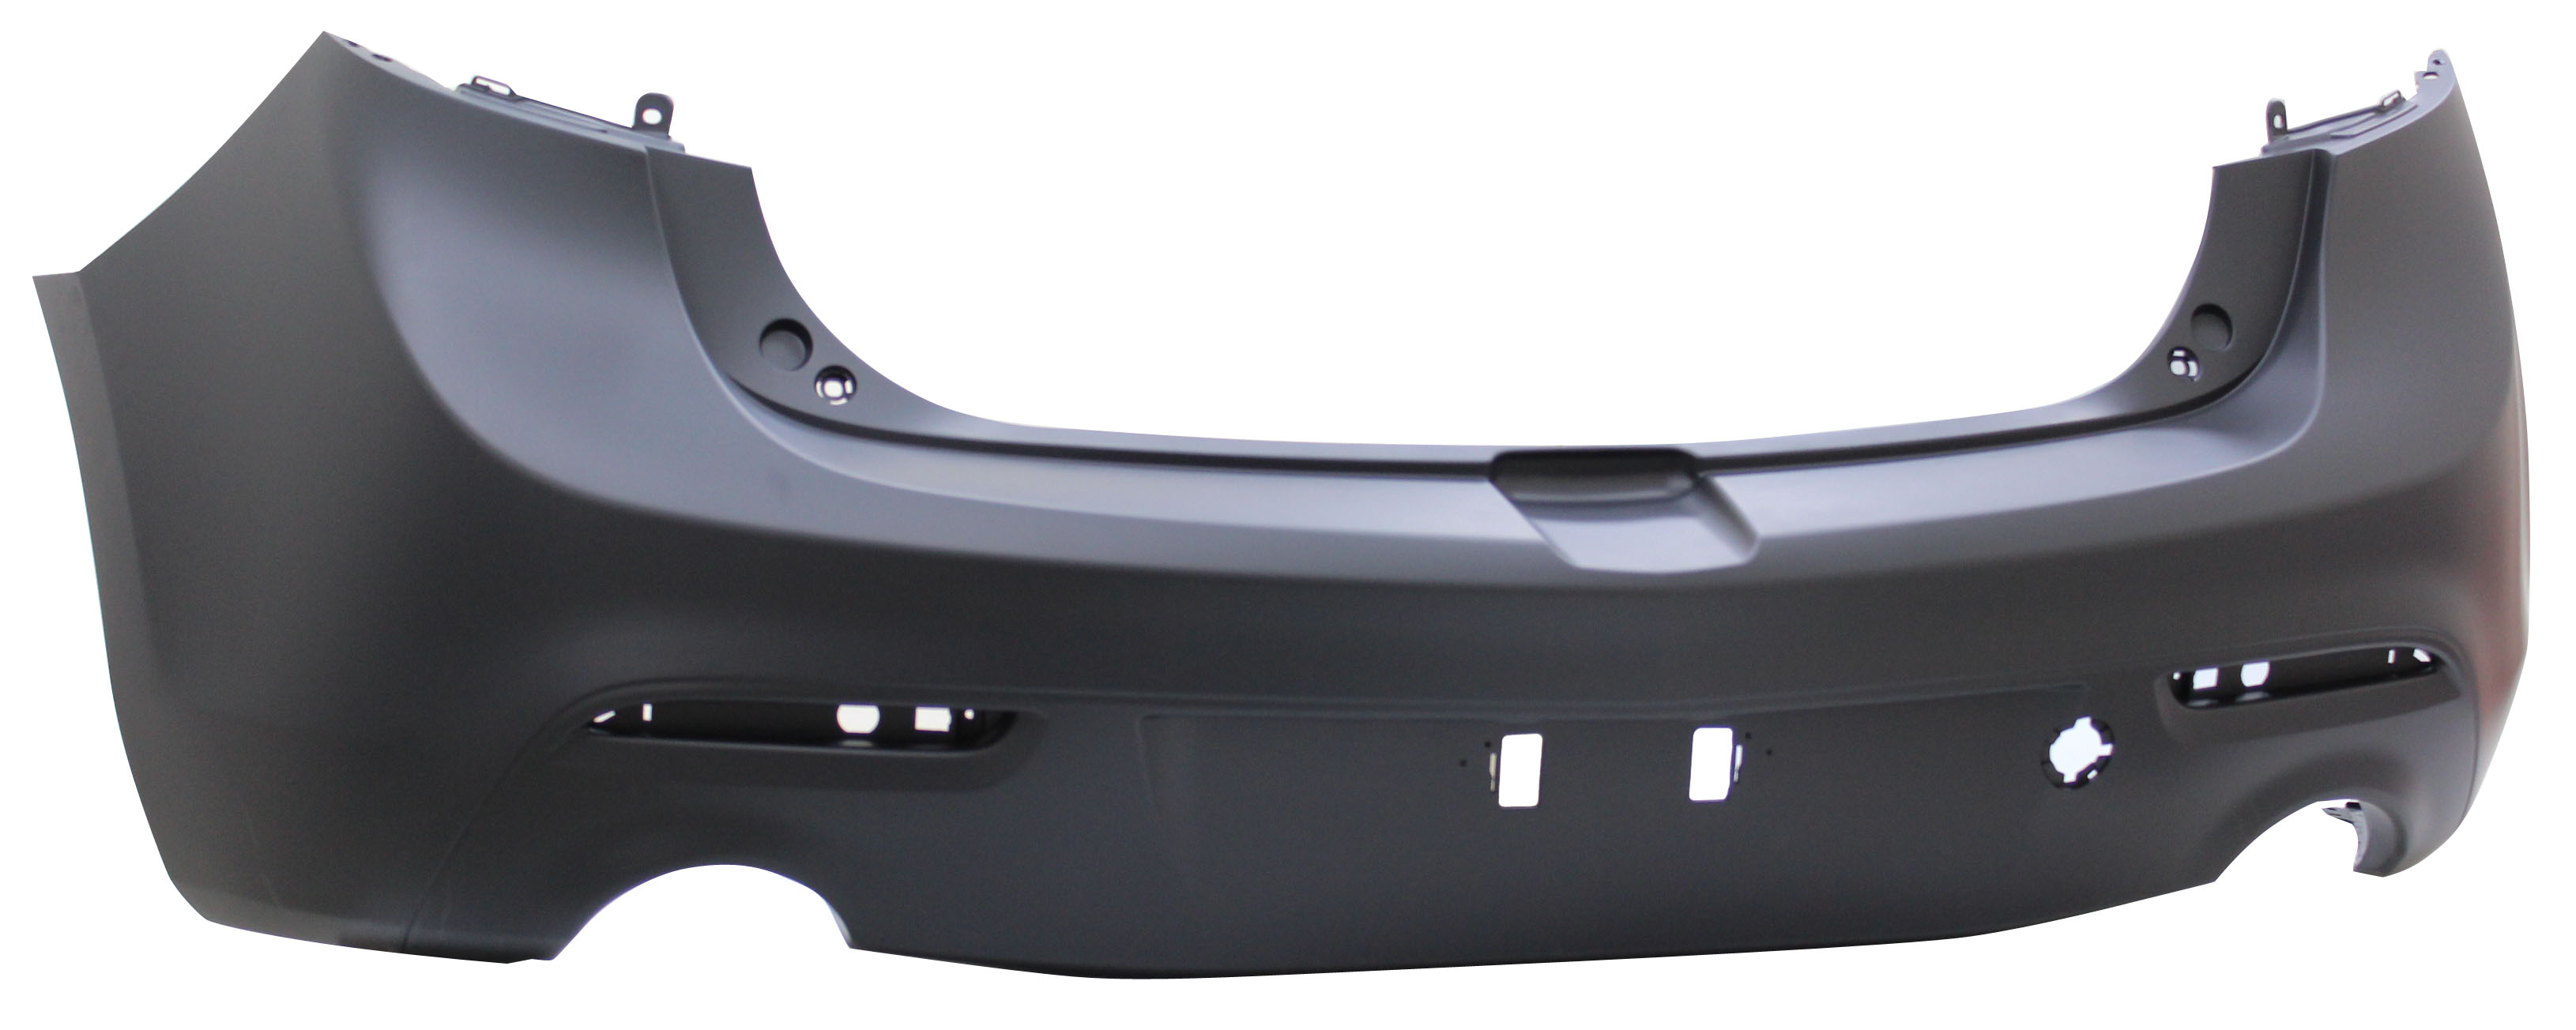 Aftermarket BUMPER COVERS for MAZDA - 3, 3,10-13,Rear bumper cover